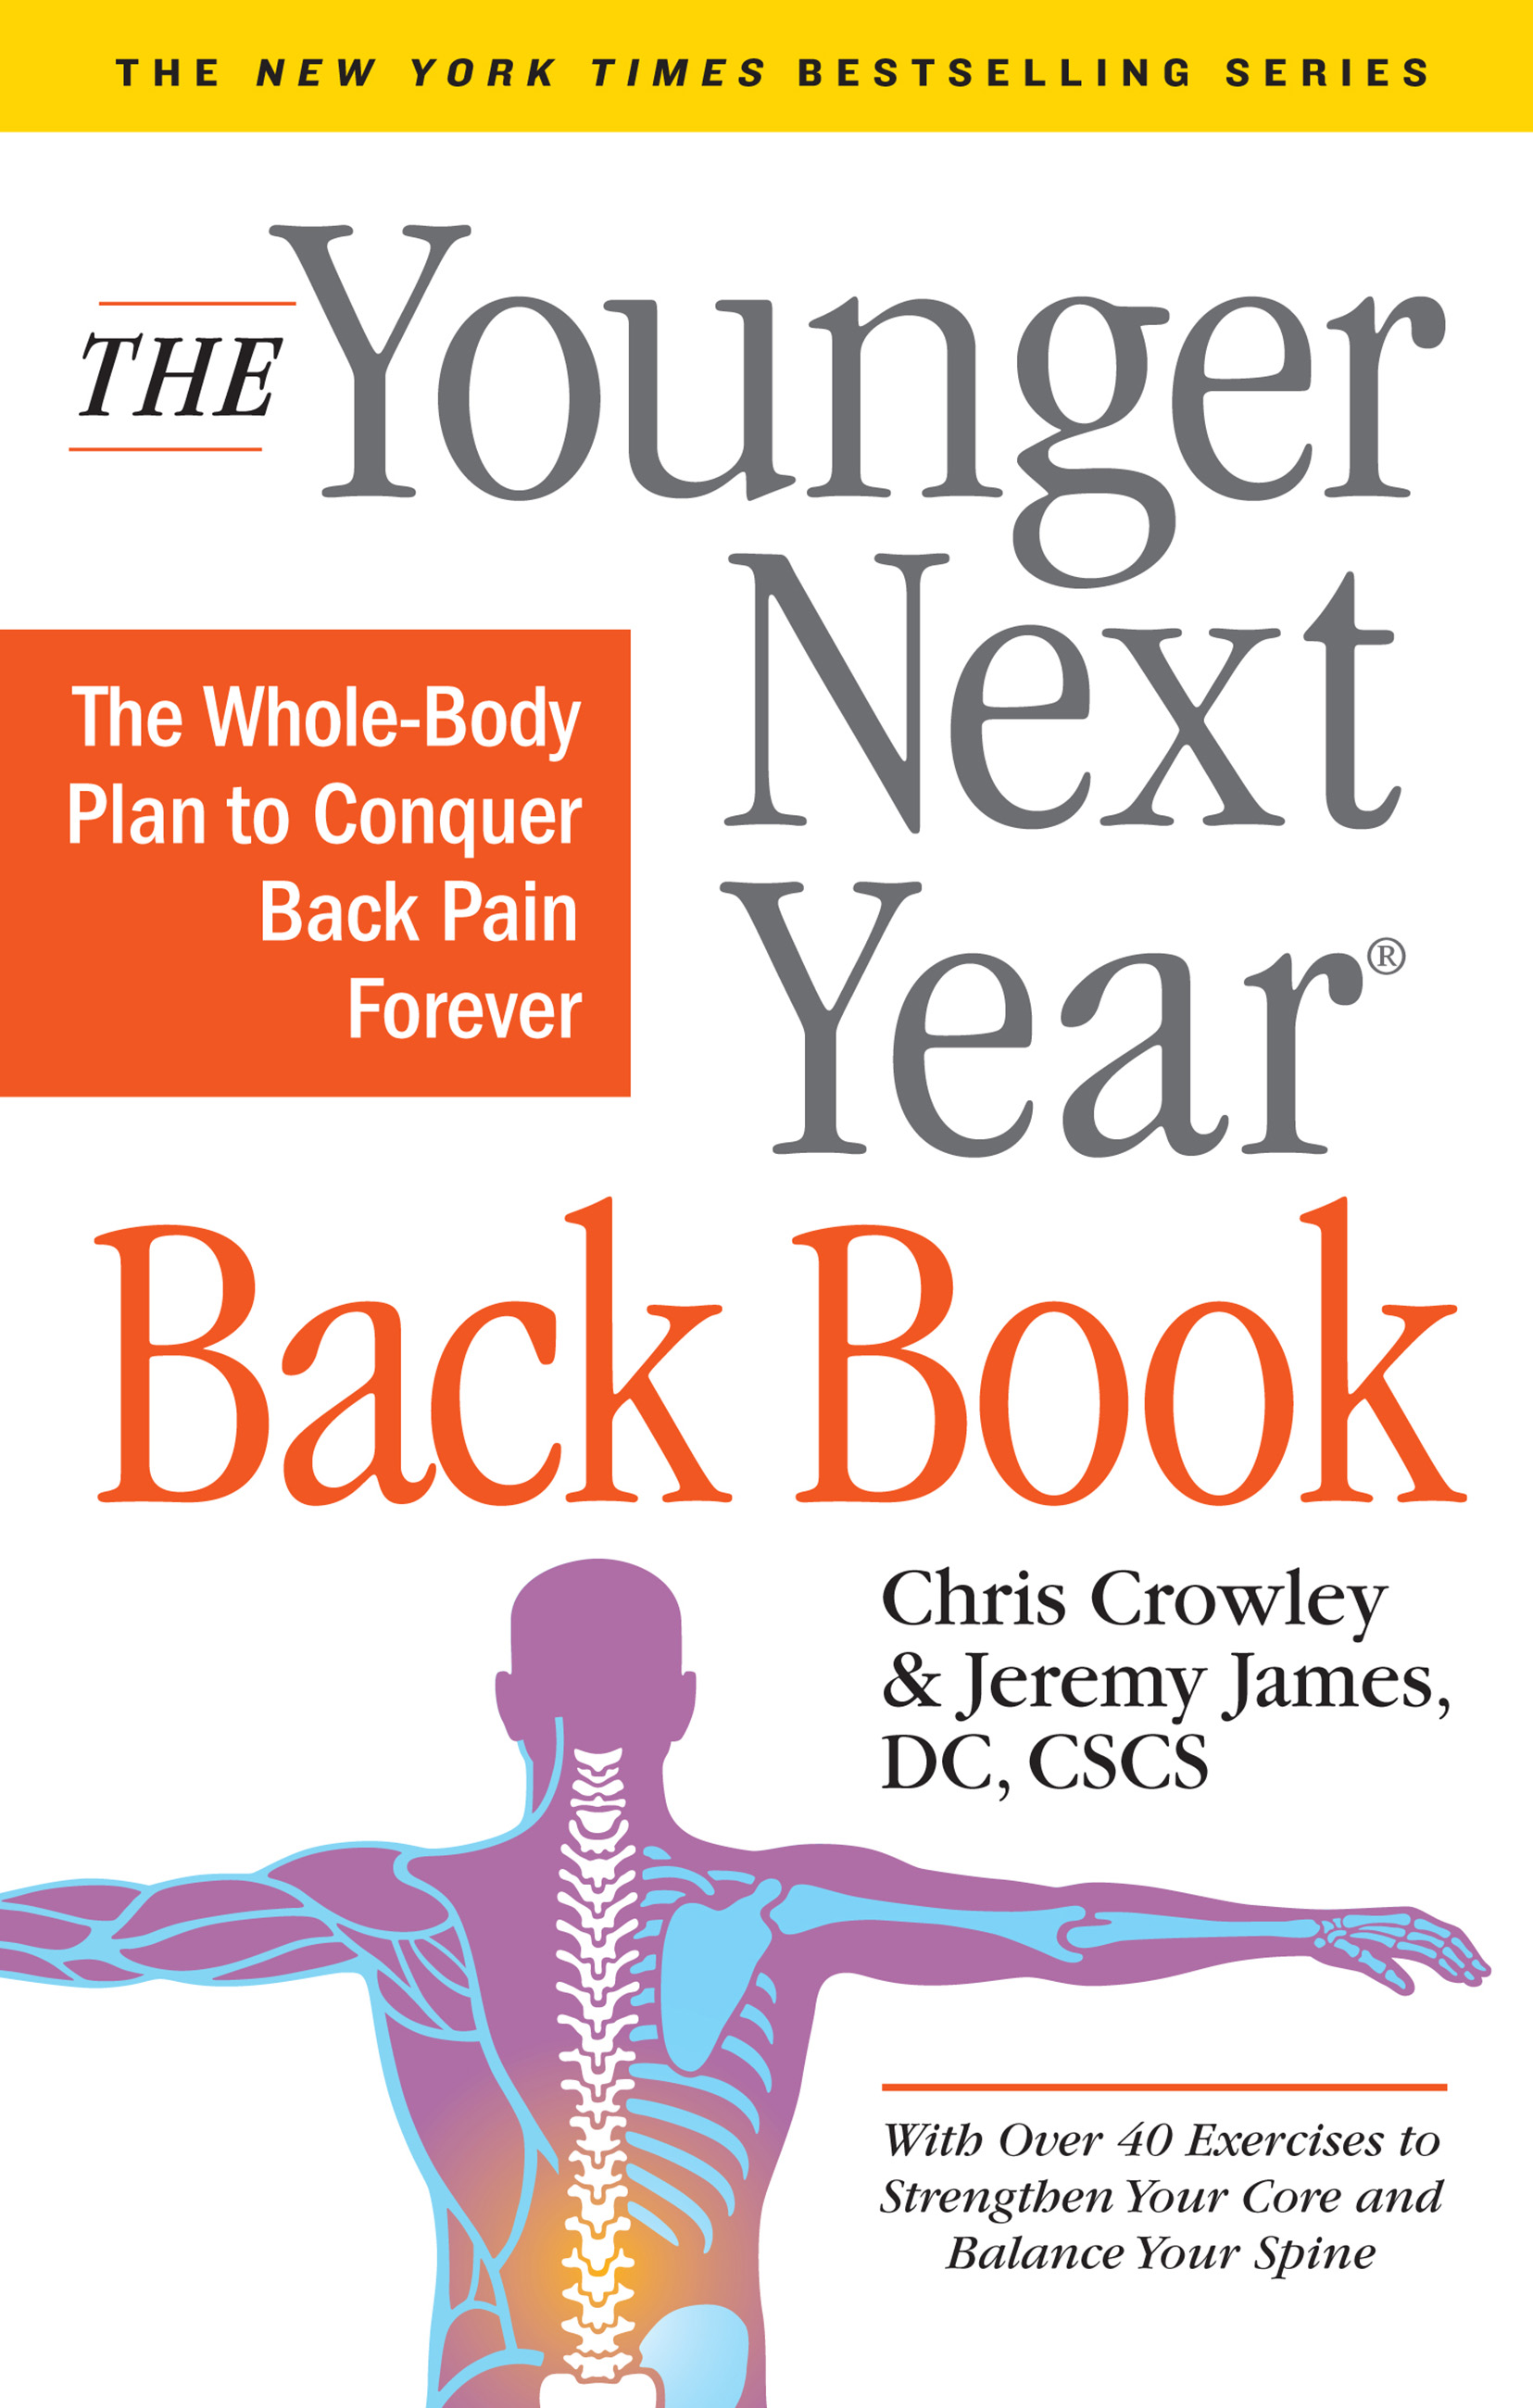 The younger next year back book the whole-body plan to conquer back pain forever cover image